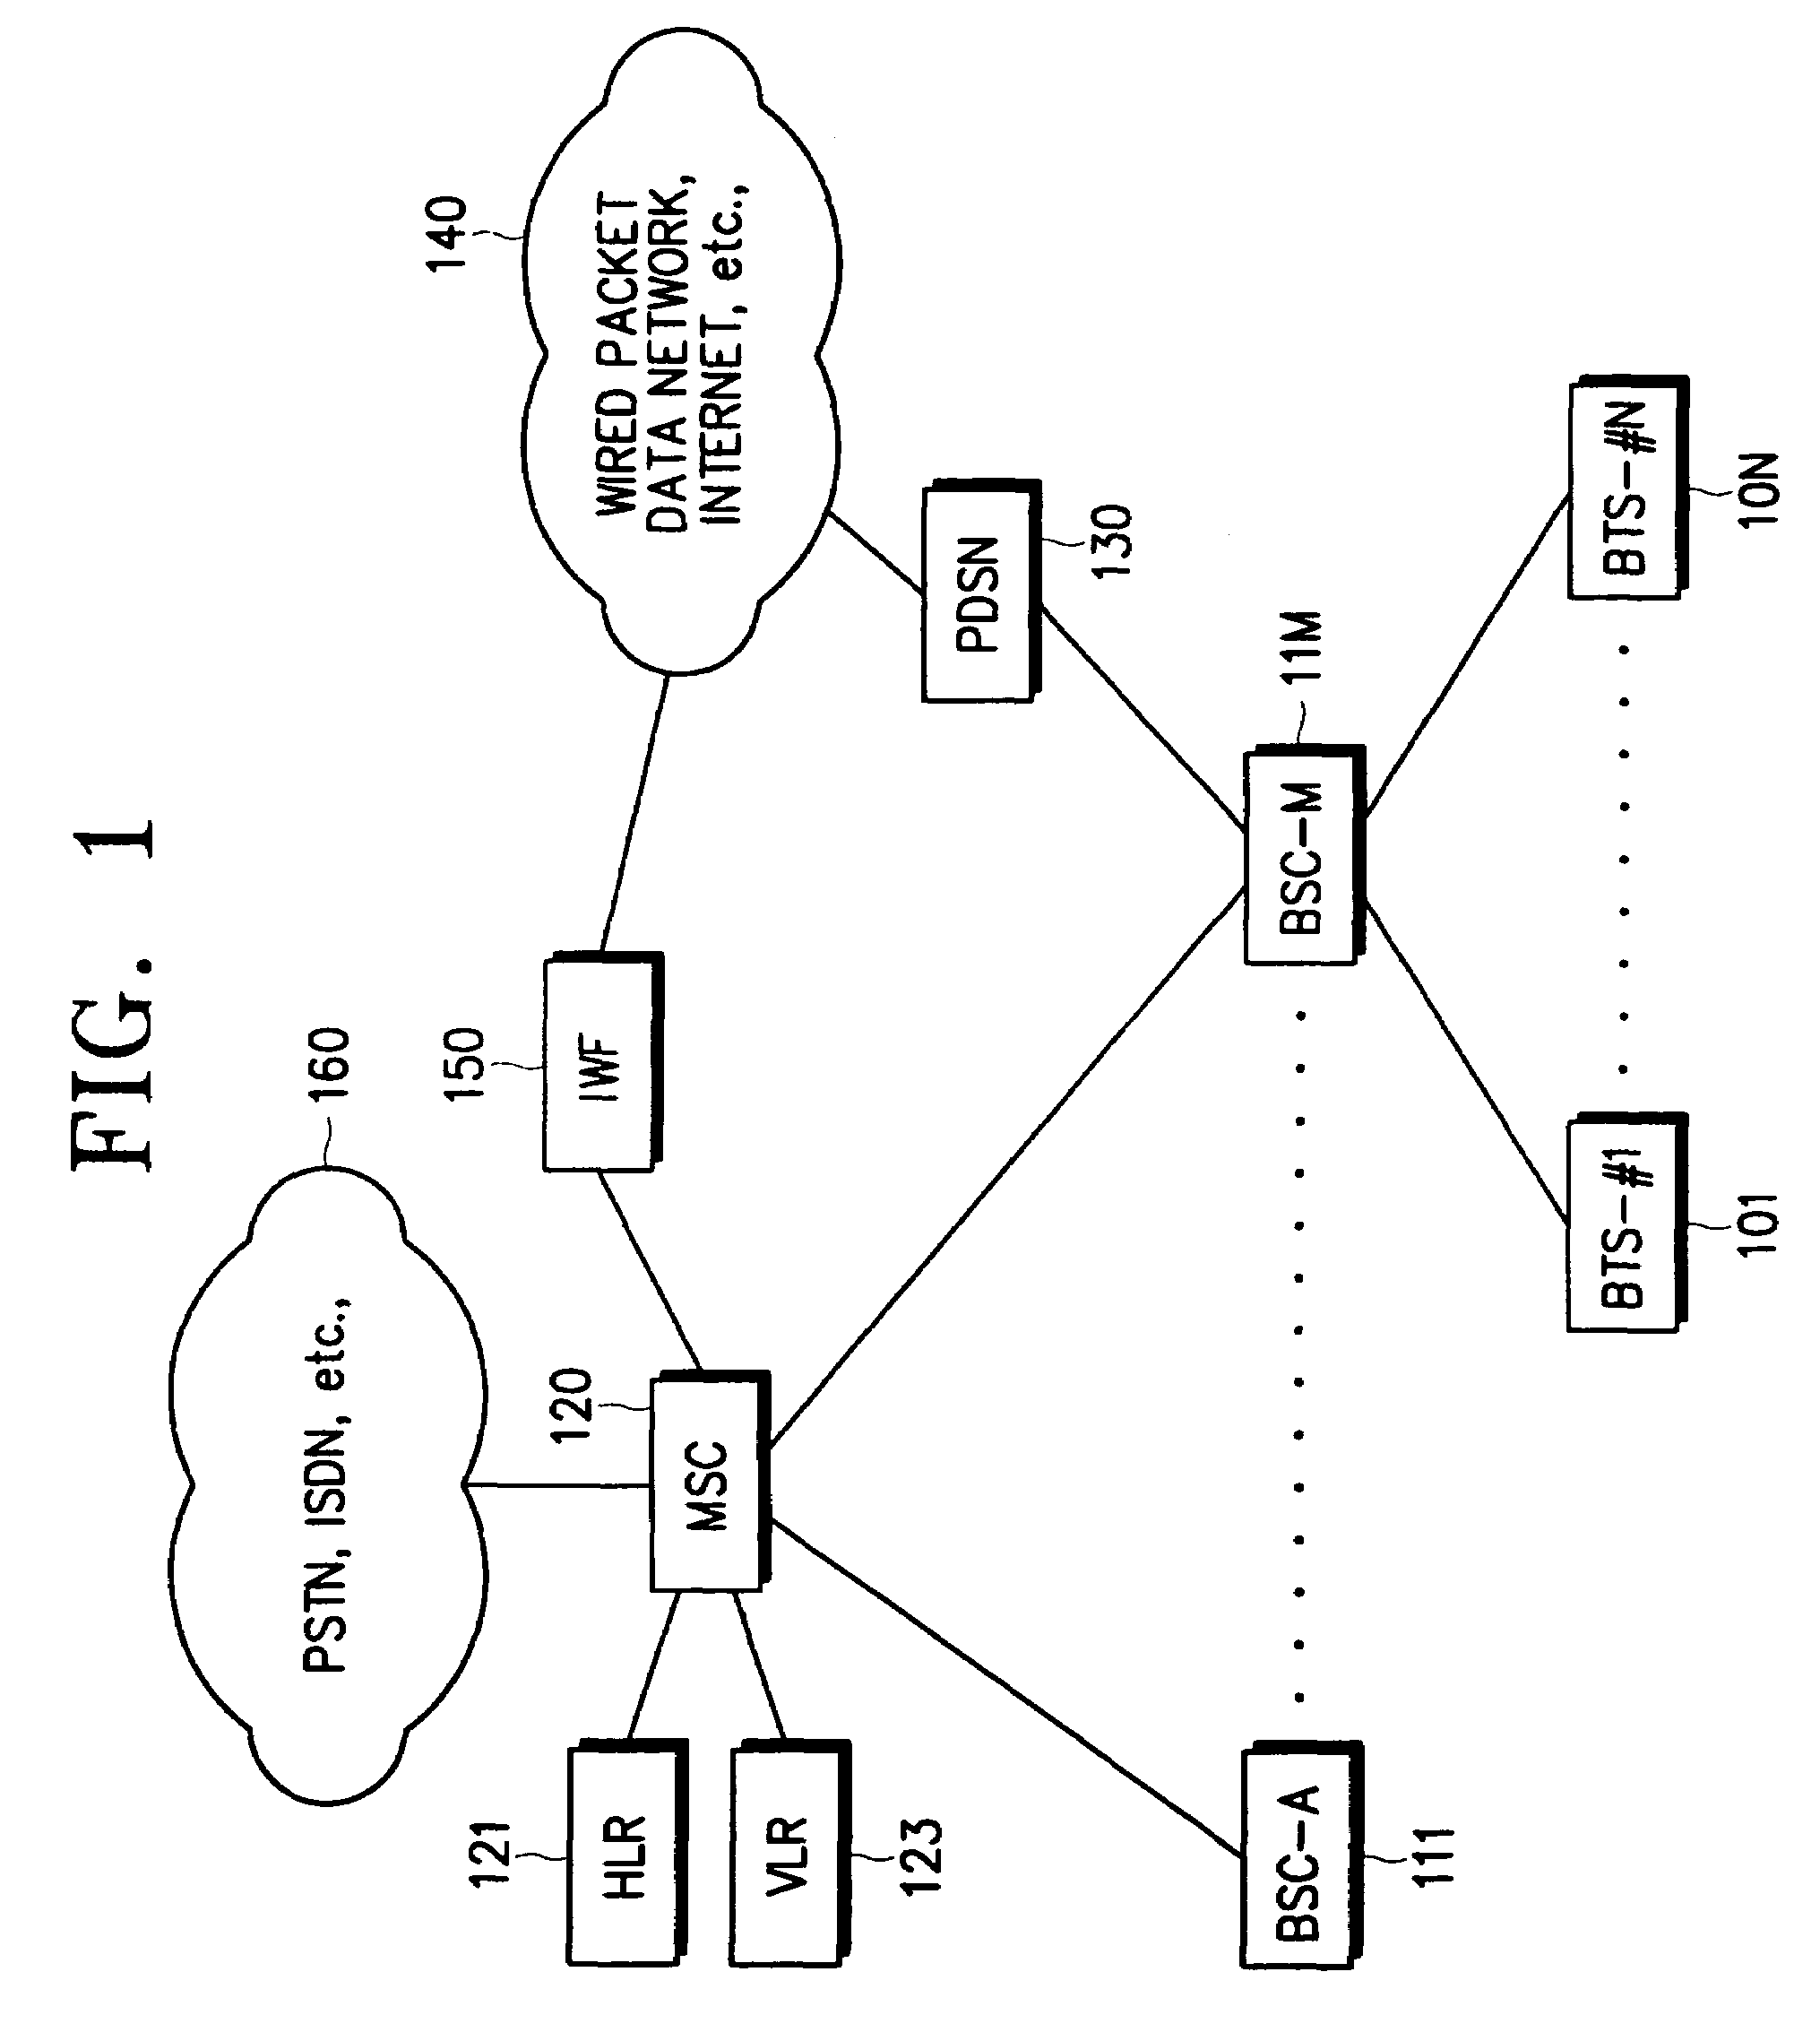 Power control apparatus and method in a wireless communication system using scheduled packet data service channel